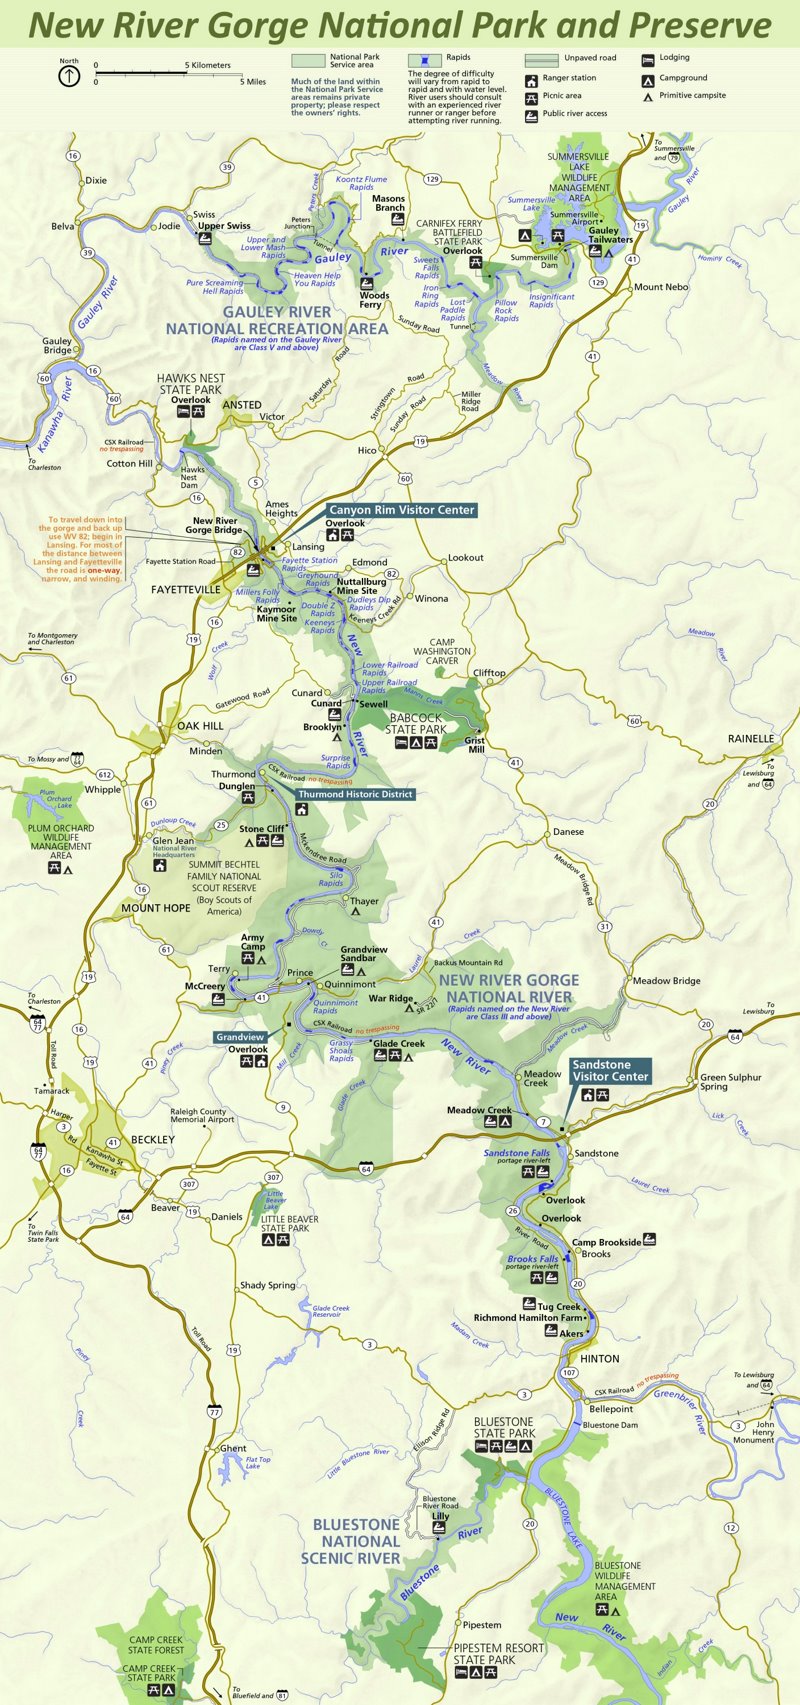 Map of New River Gorge National Park and Preserve